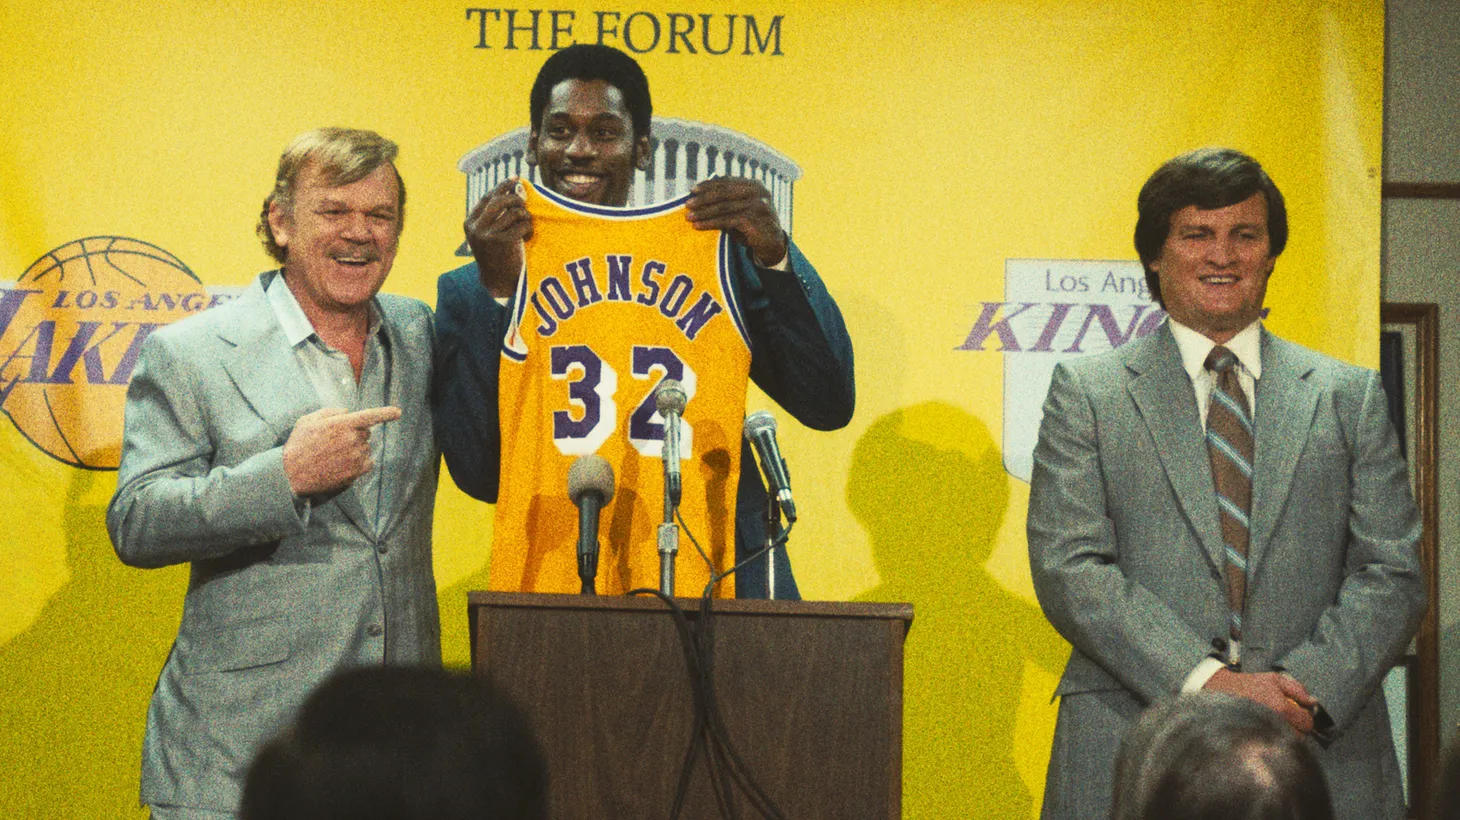 HBO’s “Winning Time” includes longtime actors like John C. Reilly (left), who plays LA Lakers owner Jerry Buss, and new talent like Quincy Isaiah (center), who plays Ervin “Magic” Johnson.